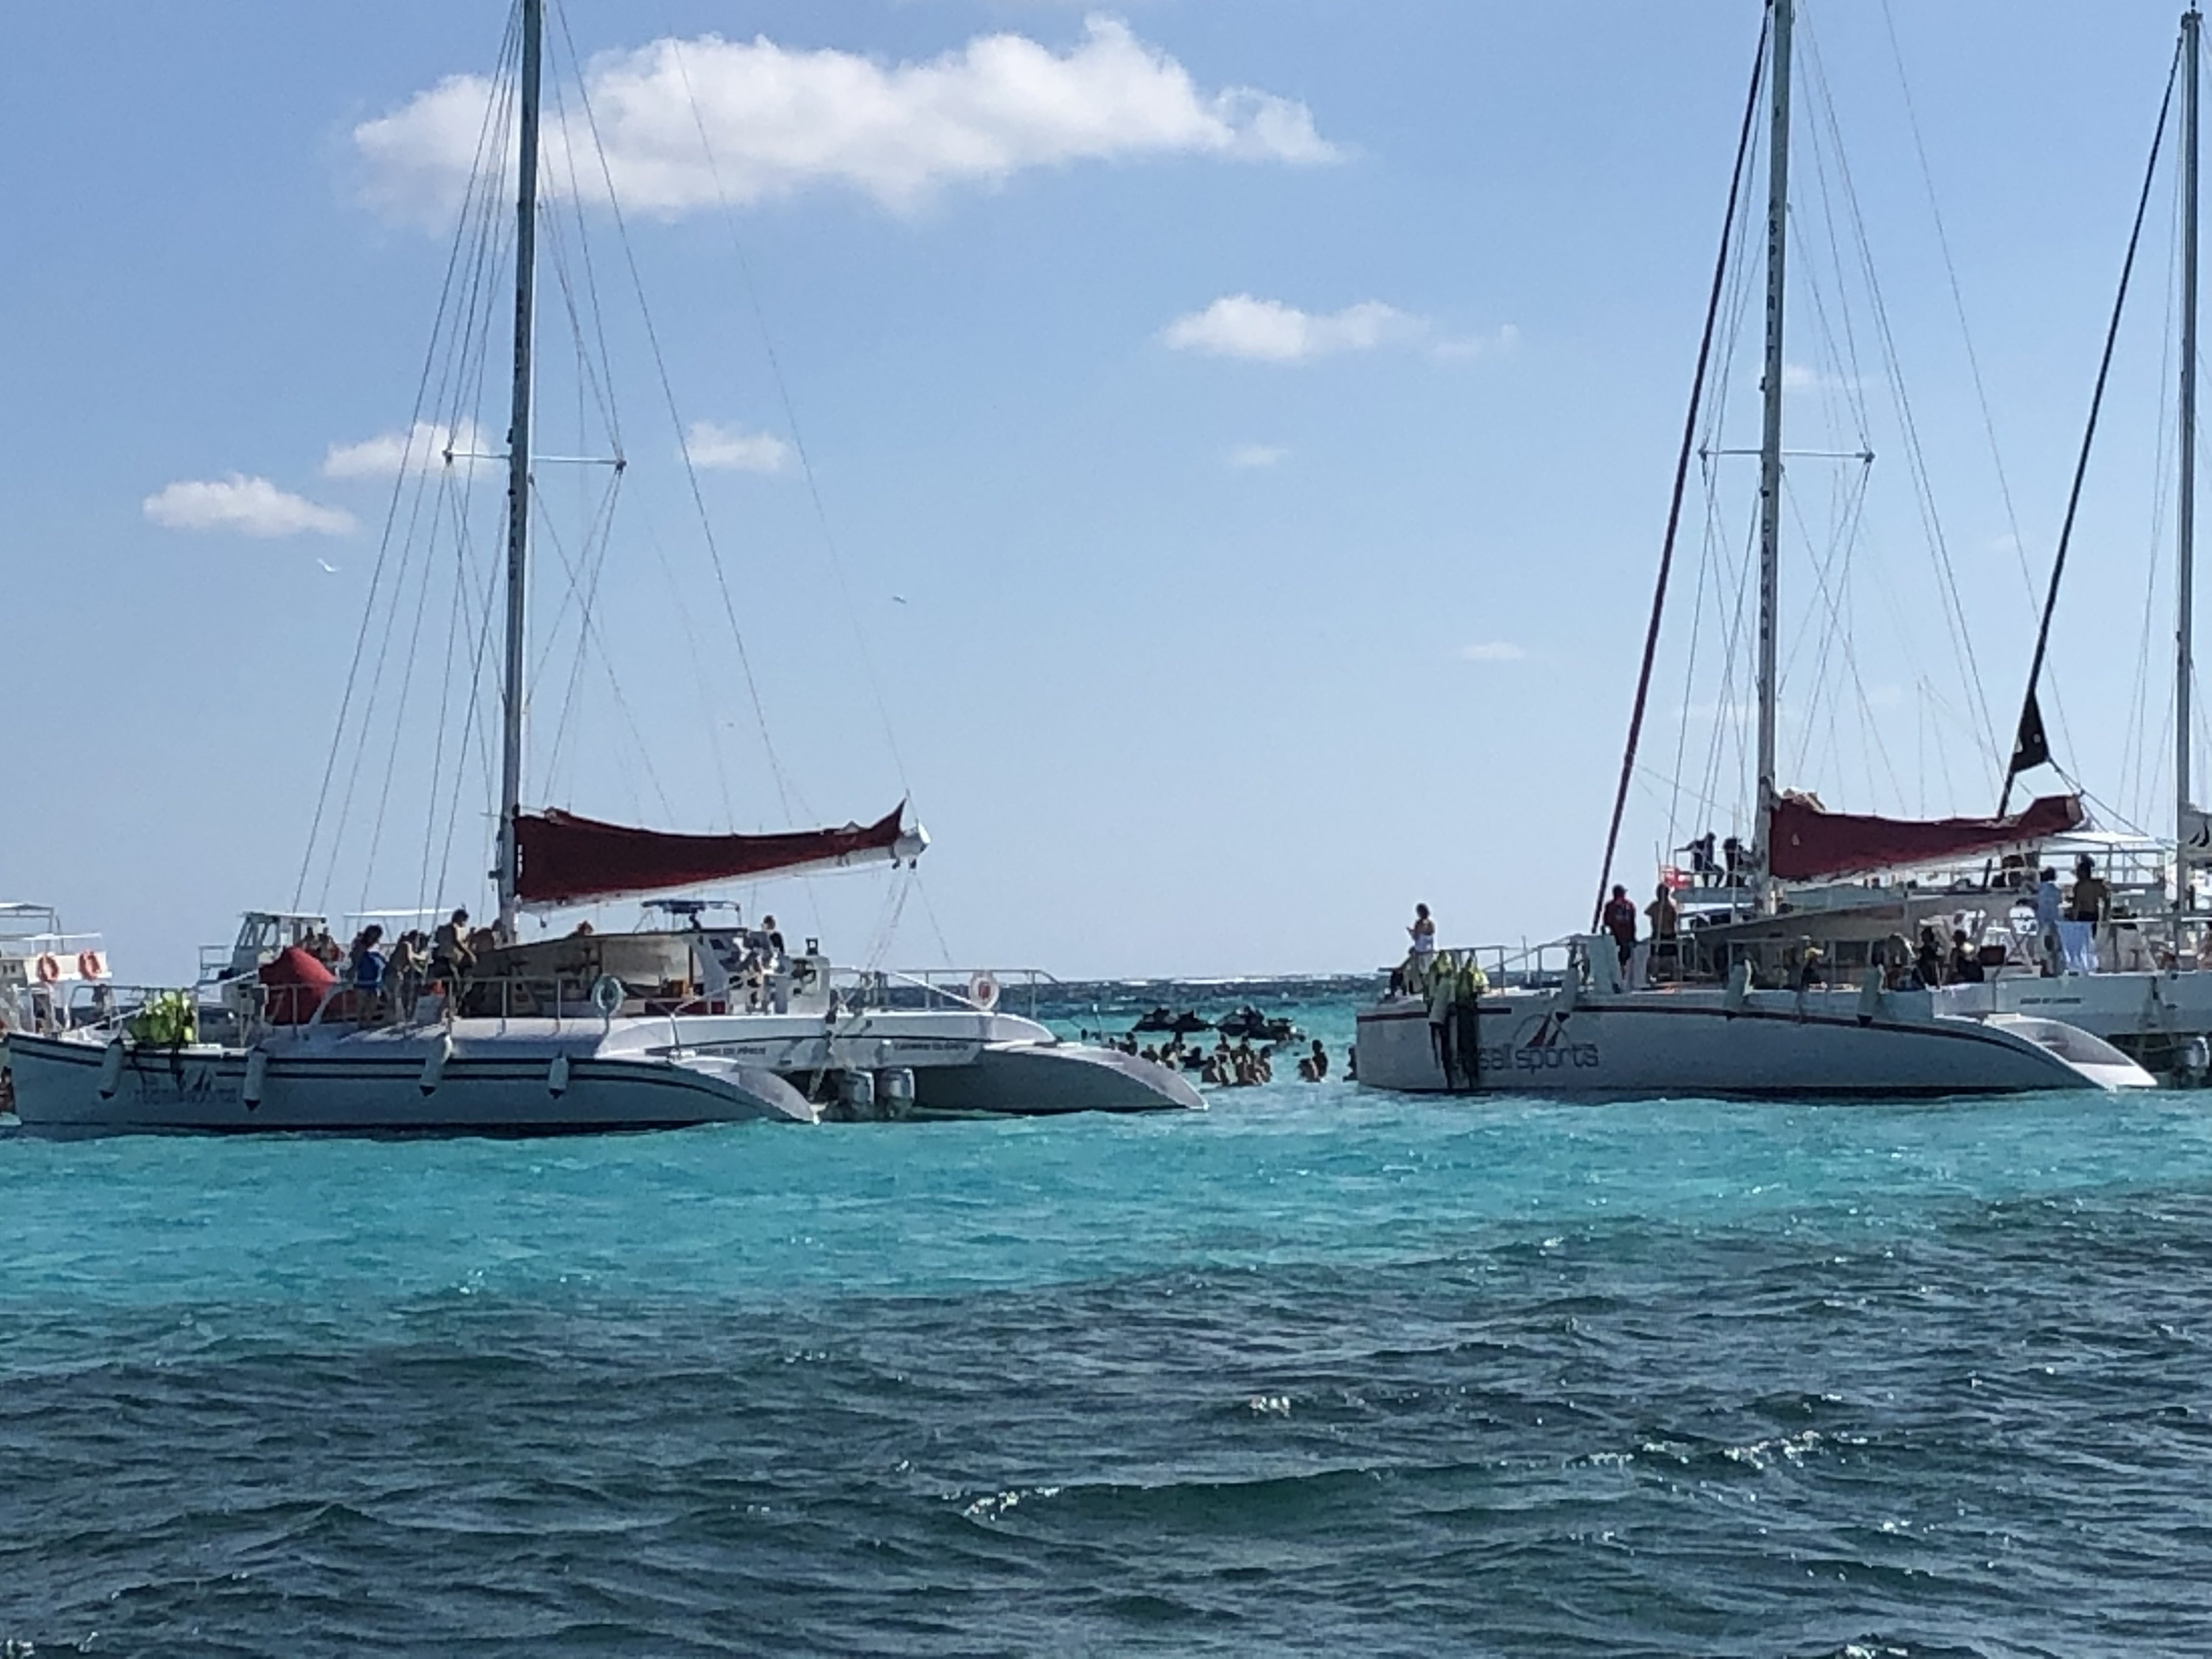 A sandbar in the middle of the Caribbean with tame stingrays? Yes, please! #grandcayman